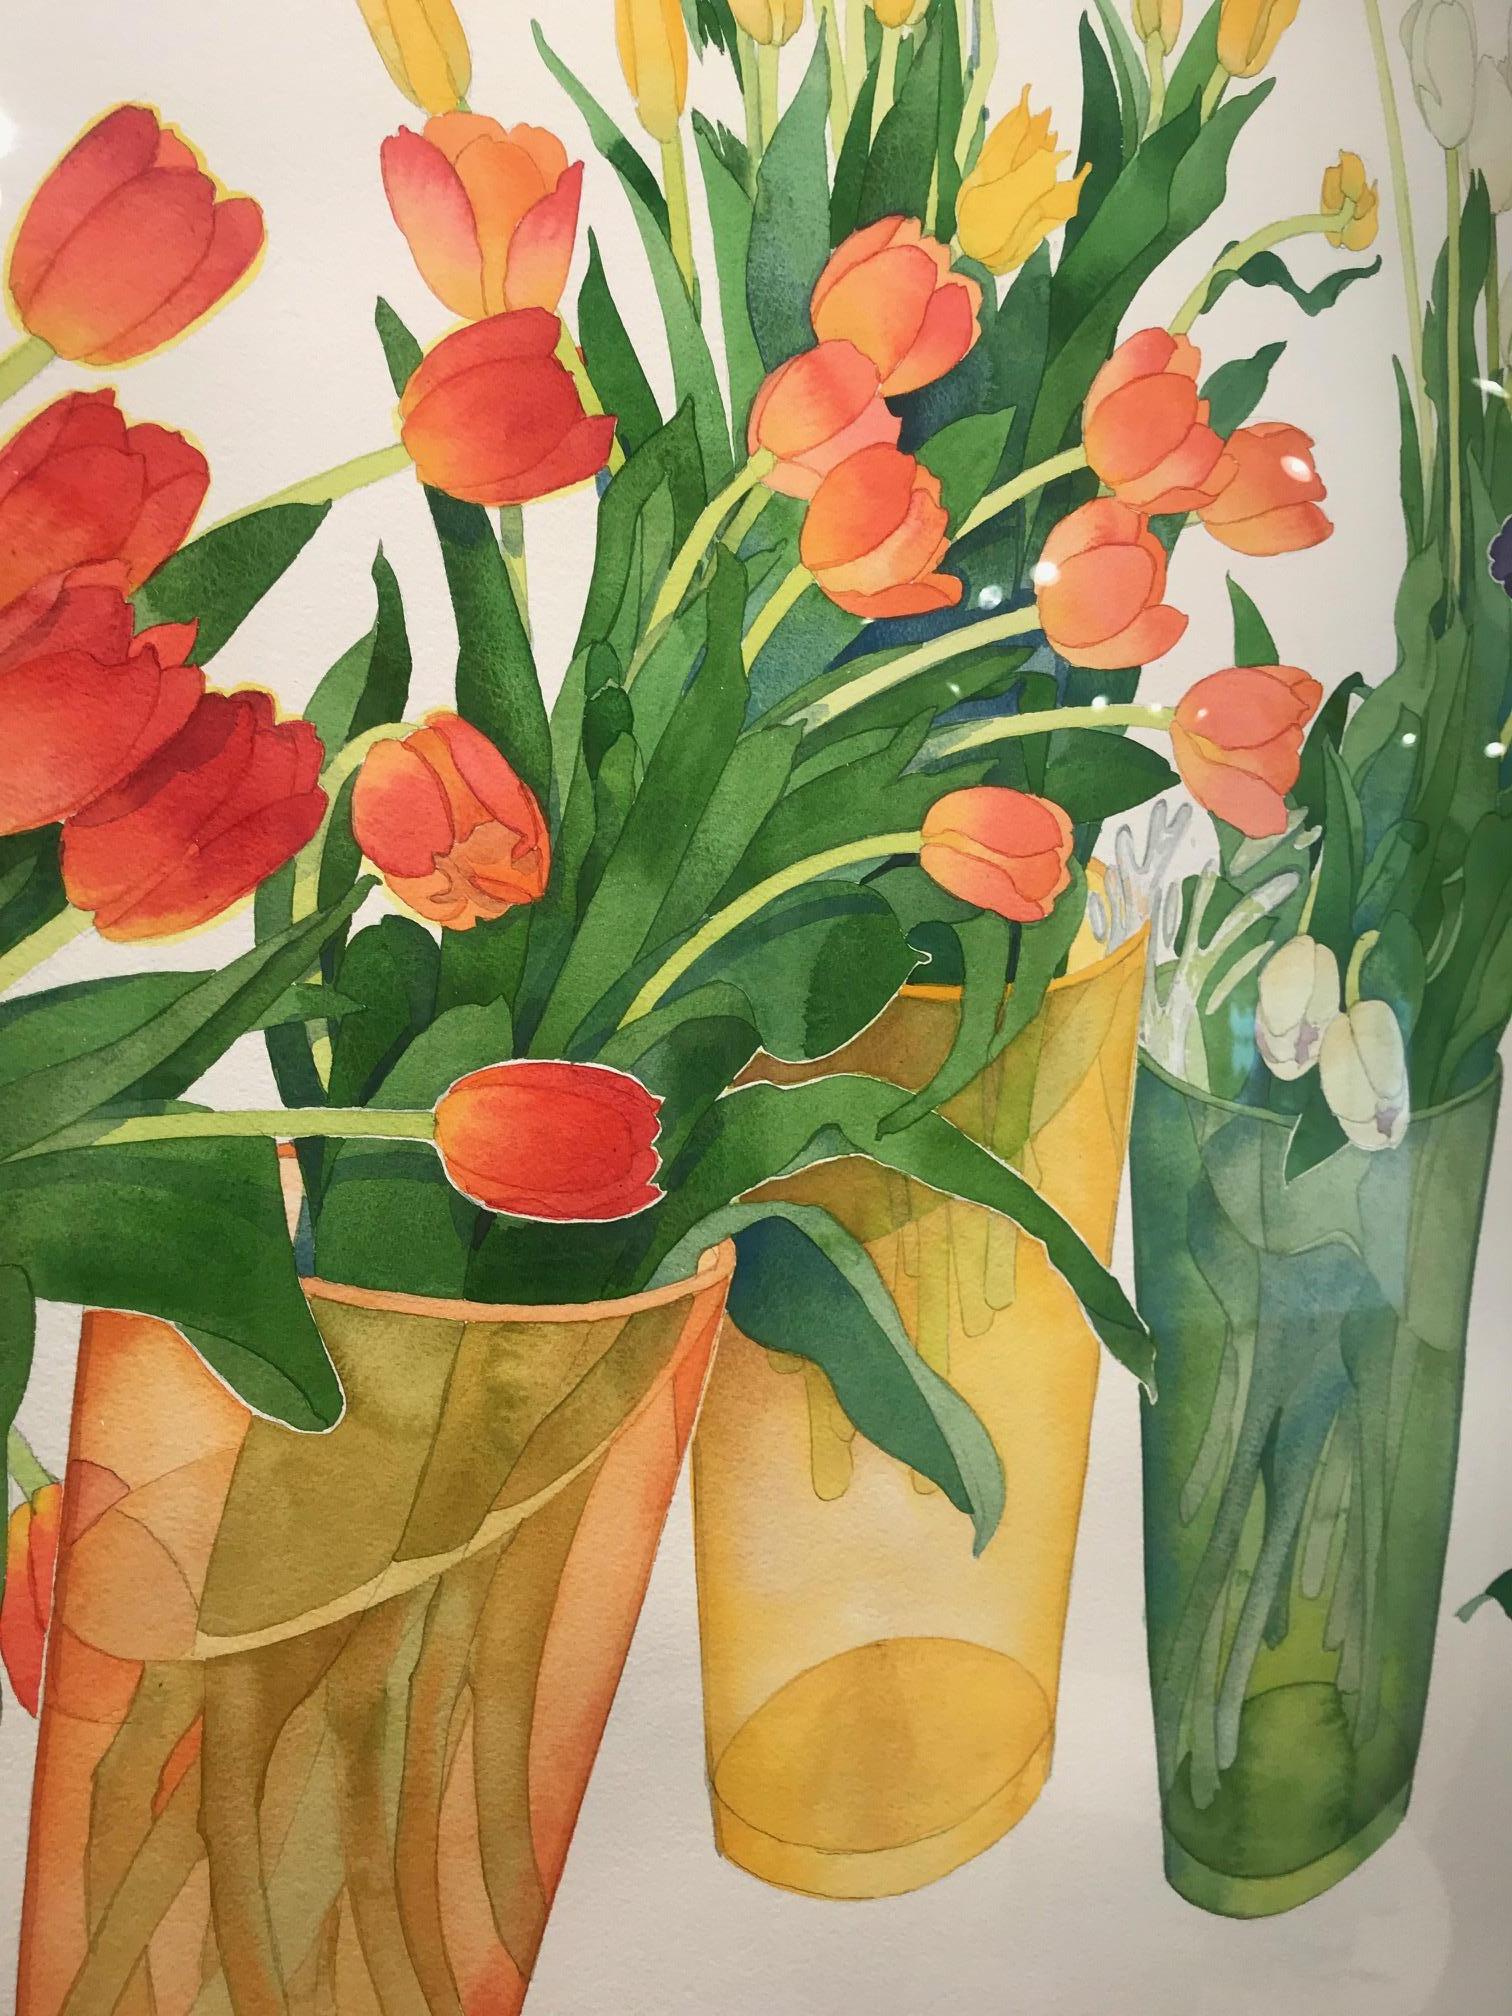 'Rainbow Tulips' original watercolor painted in 2018/19. Large work at 40 x 60 inches, in multi-color including an explosion of red, blue, green, yellow, purple and gold. The flower filled vases appear to be falling upward, caught in flight. An